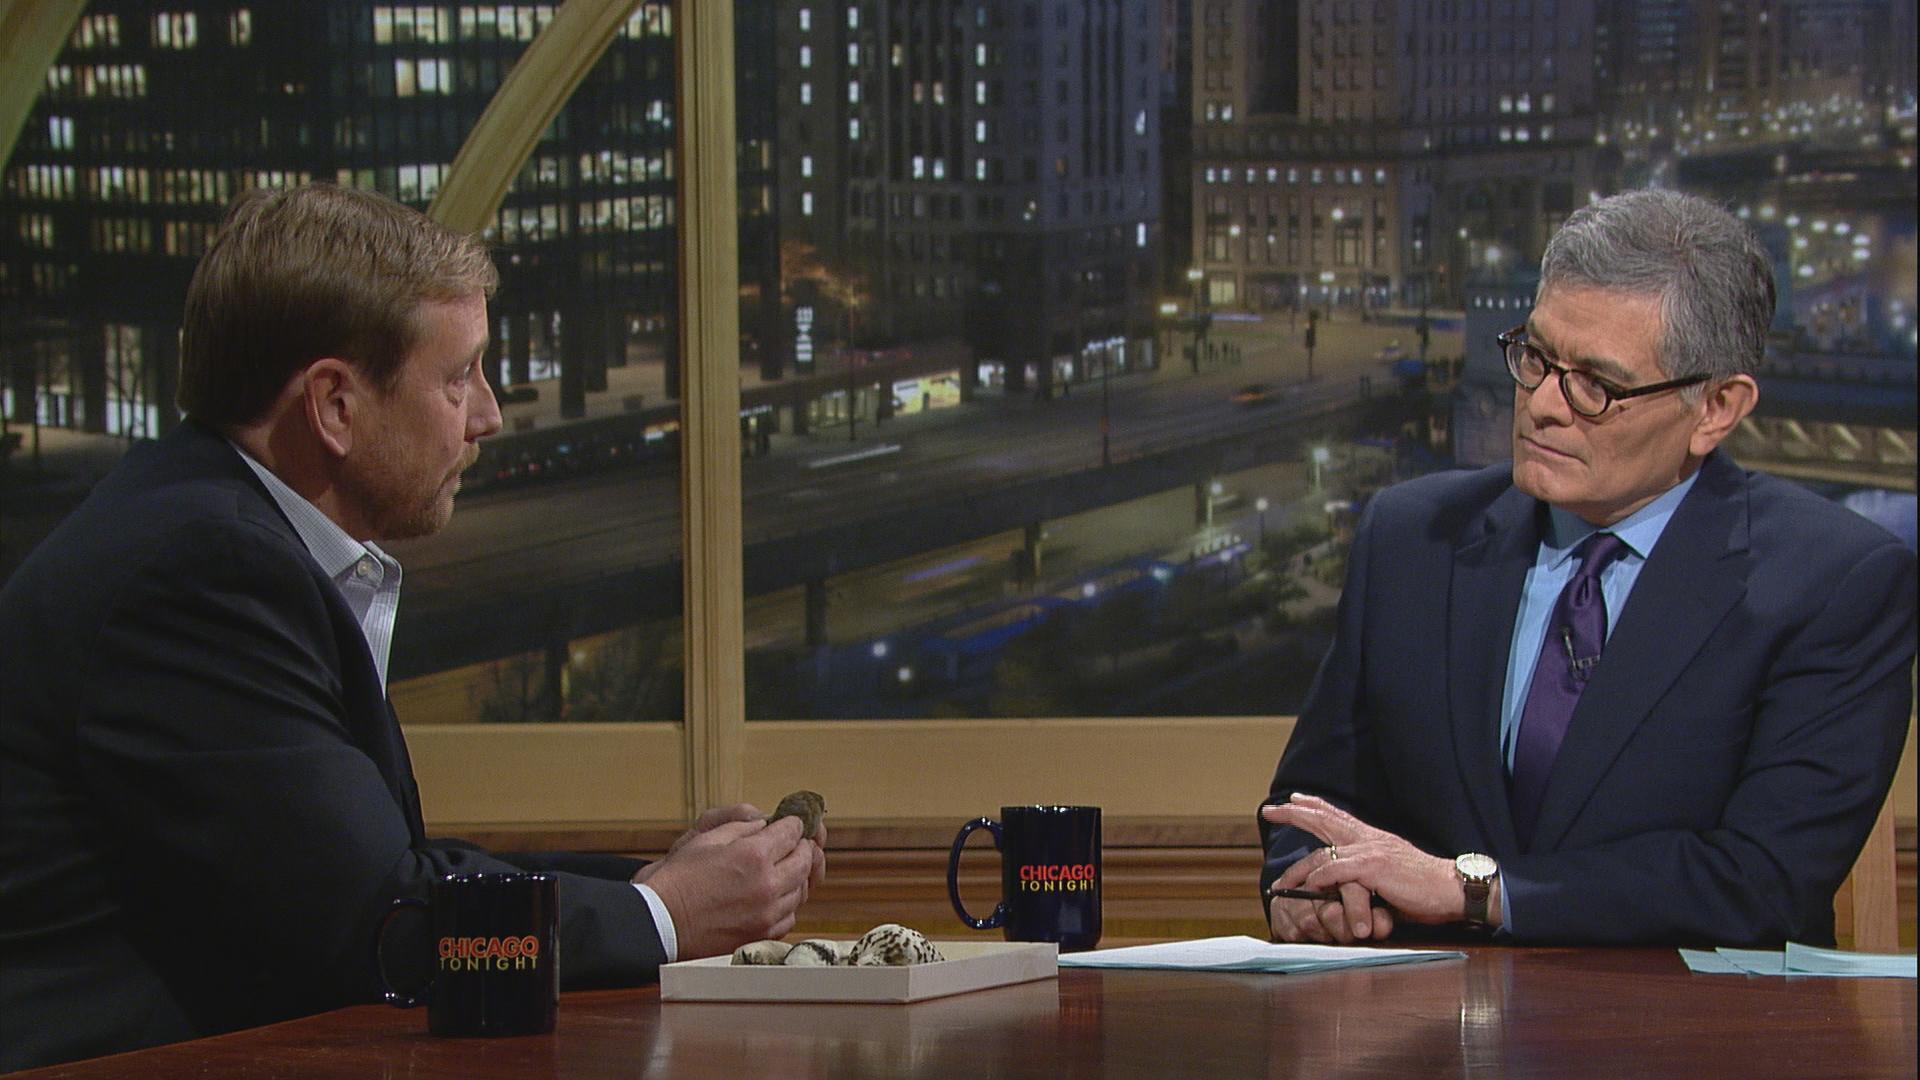 Pete Marra appears on Chicago Tonight with host Phil Ponce on Feb. 1.